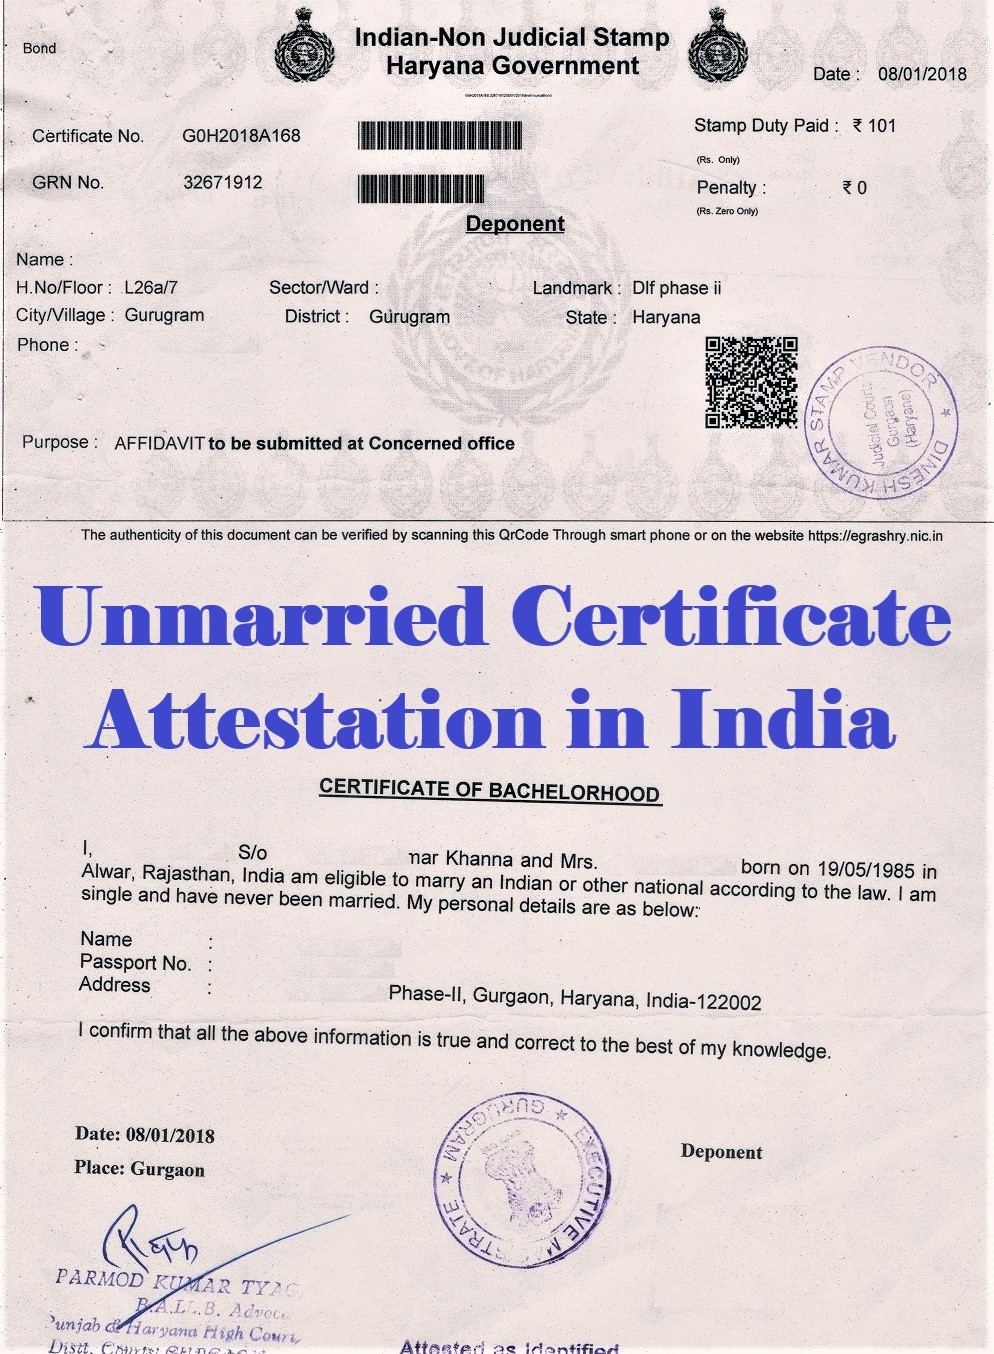 Unmarried Certificate Attestation from Gambia Embassy